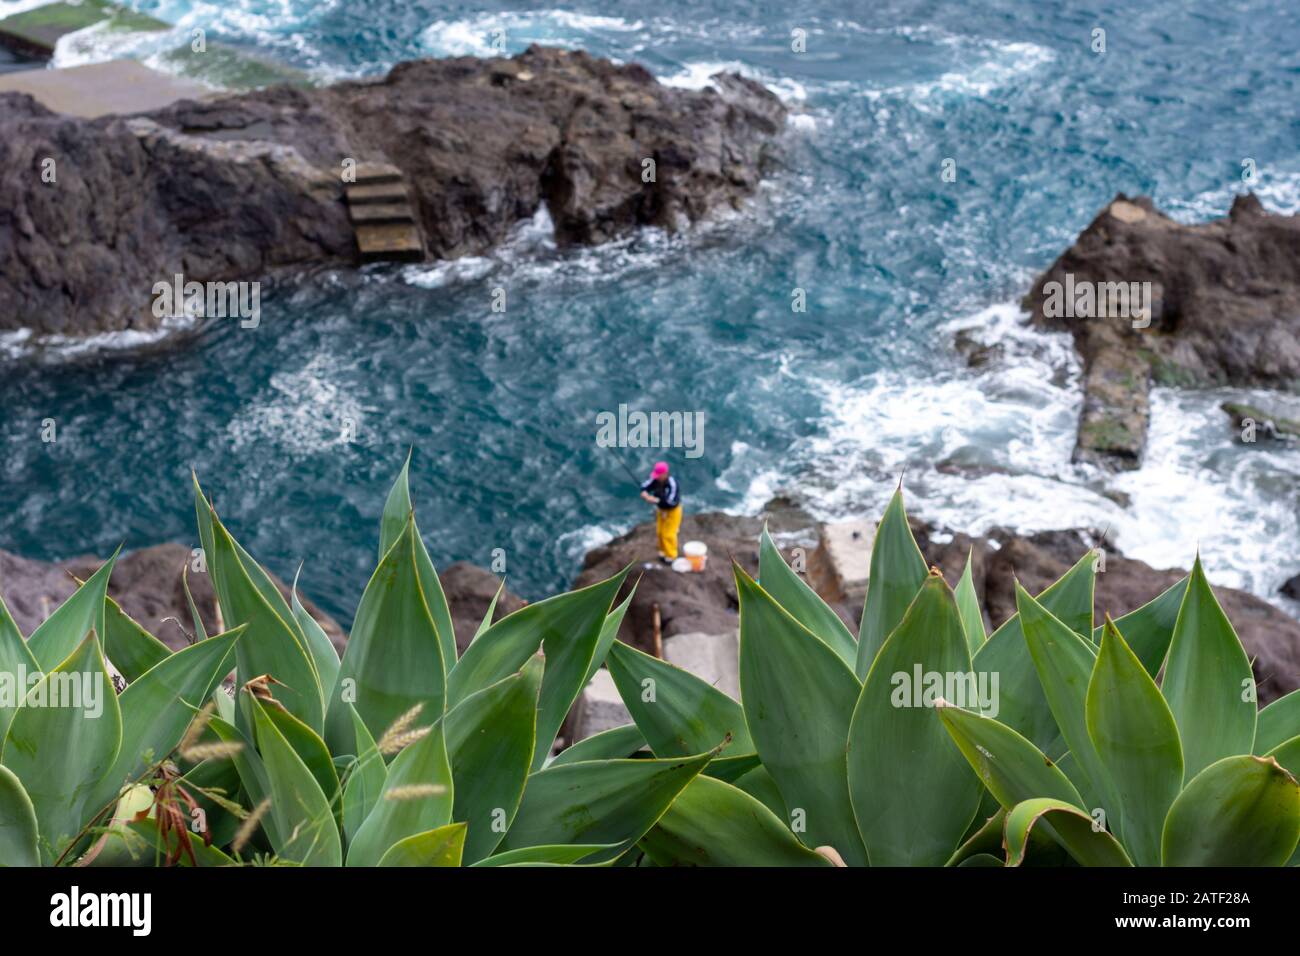 Agave plants in front and sea and cliffs and a fisherman out of focus in background, picture from Funchal Madeira, Portugal. Stock Photo